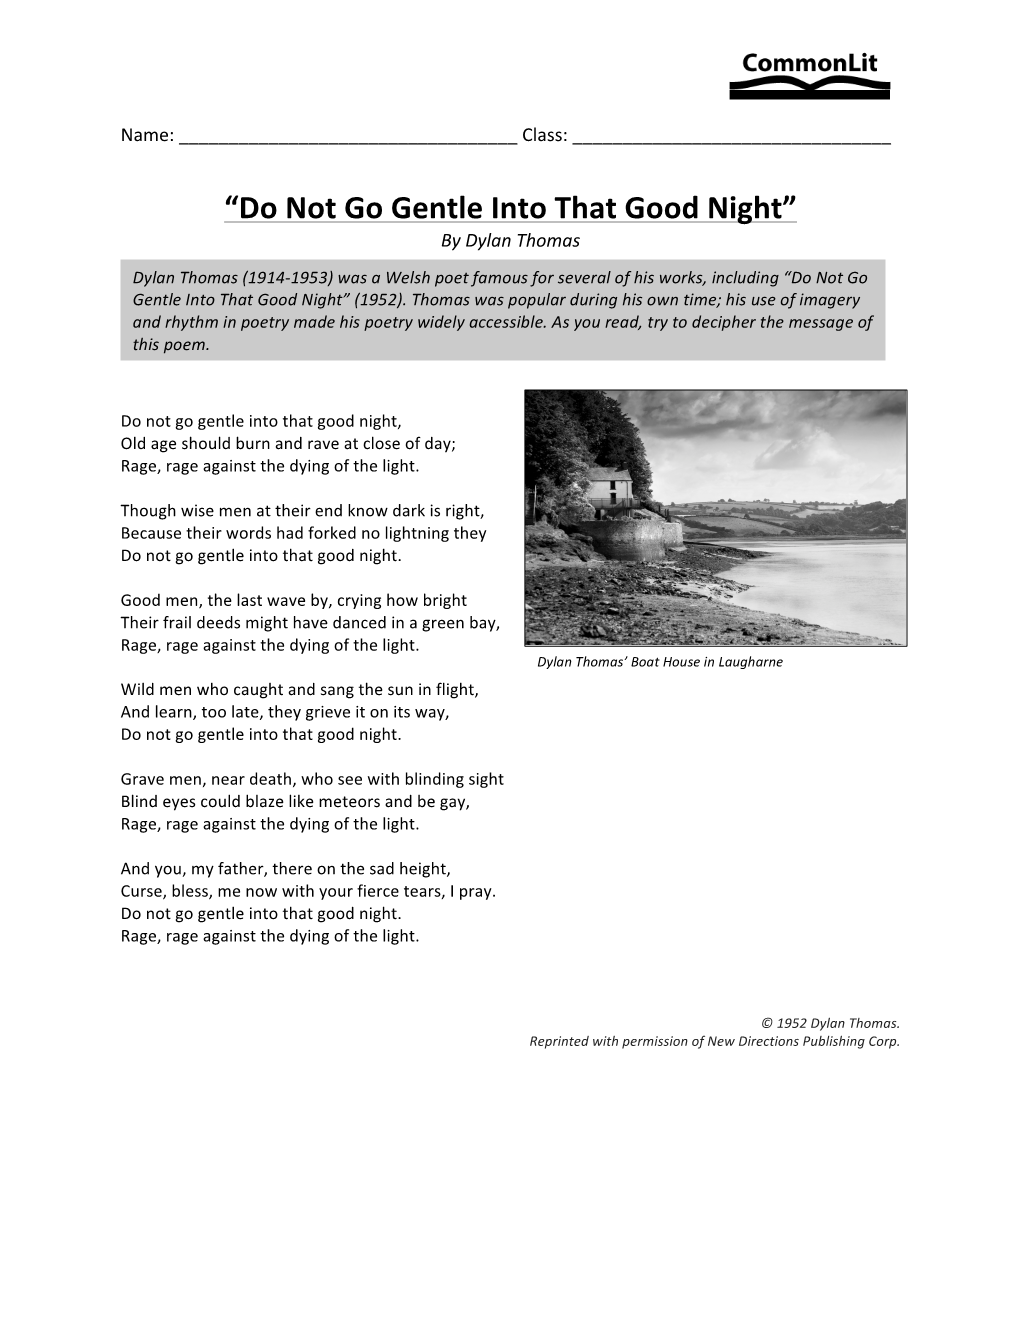 “Do Not Go Gentle Into That Good Night” by Dylan Thomas